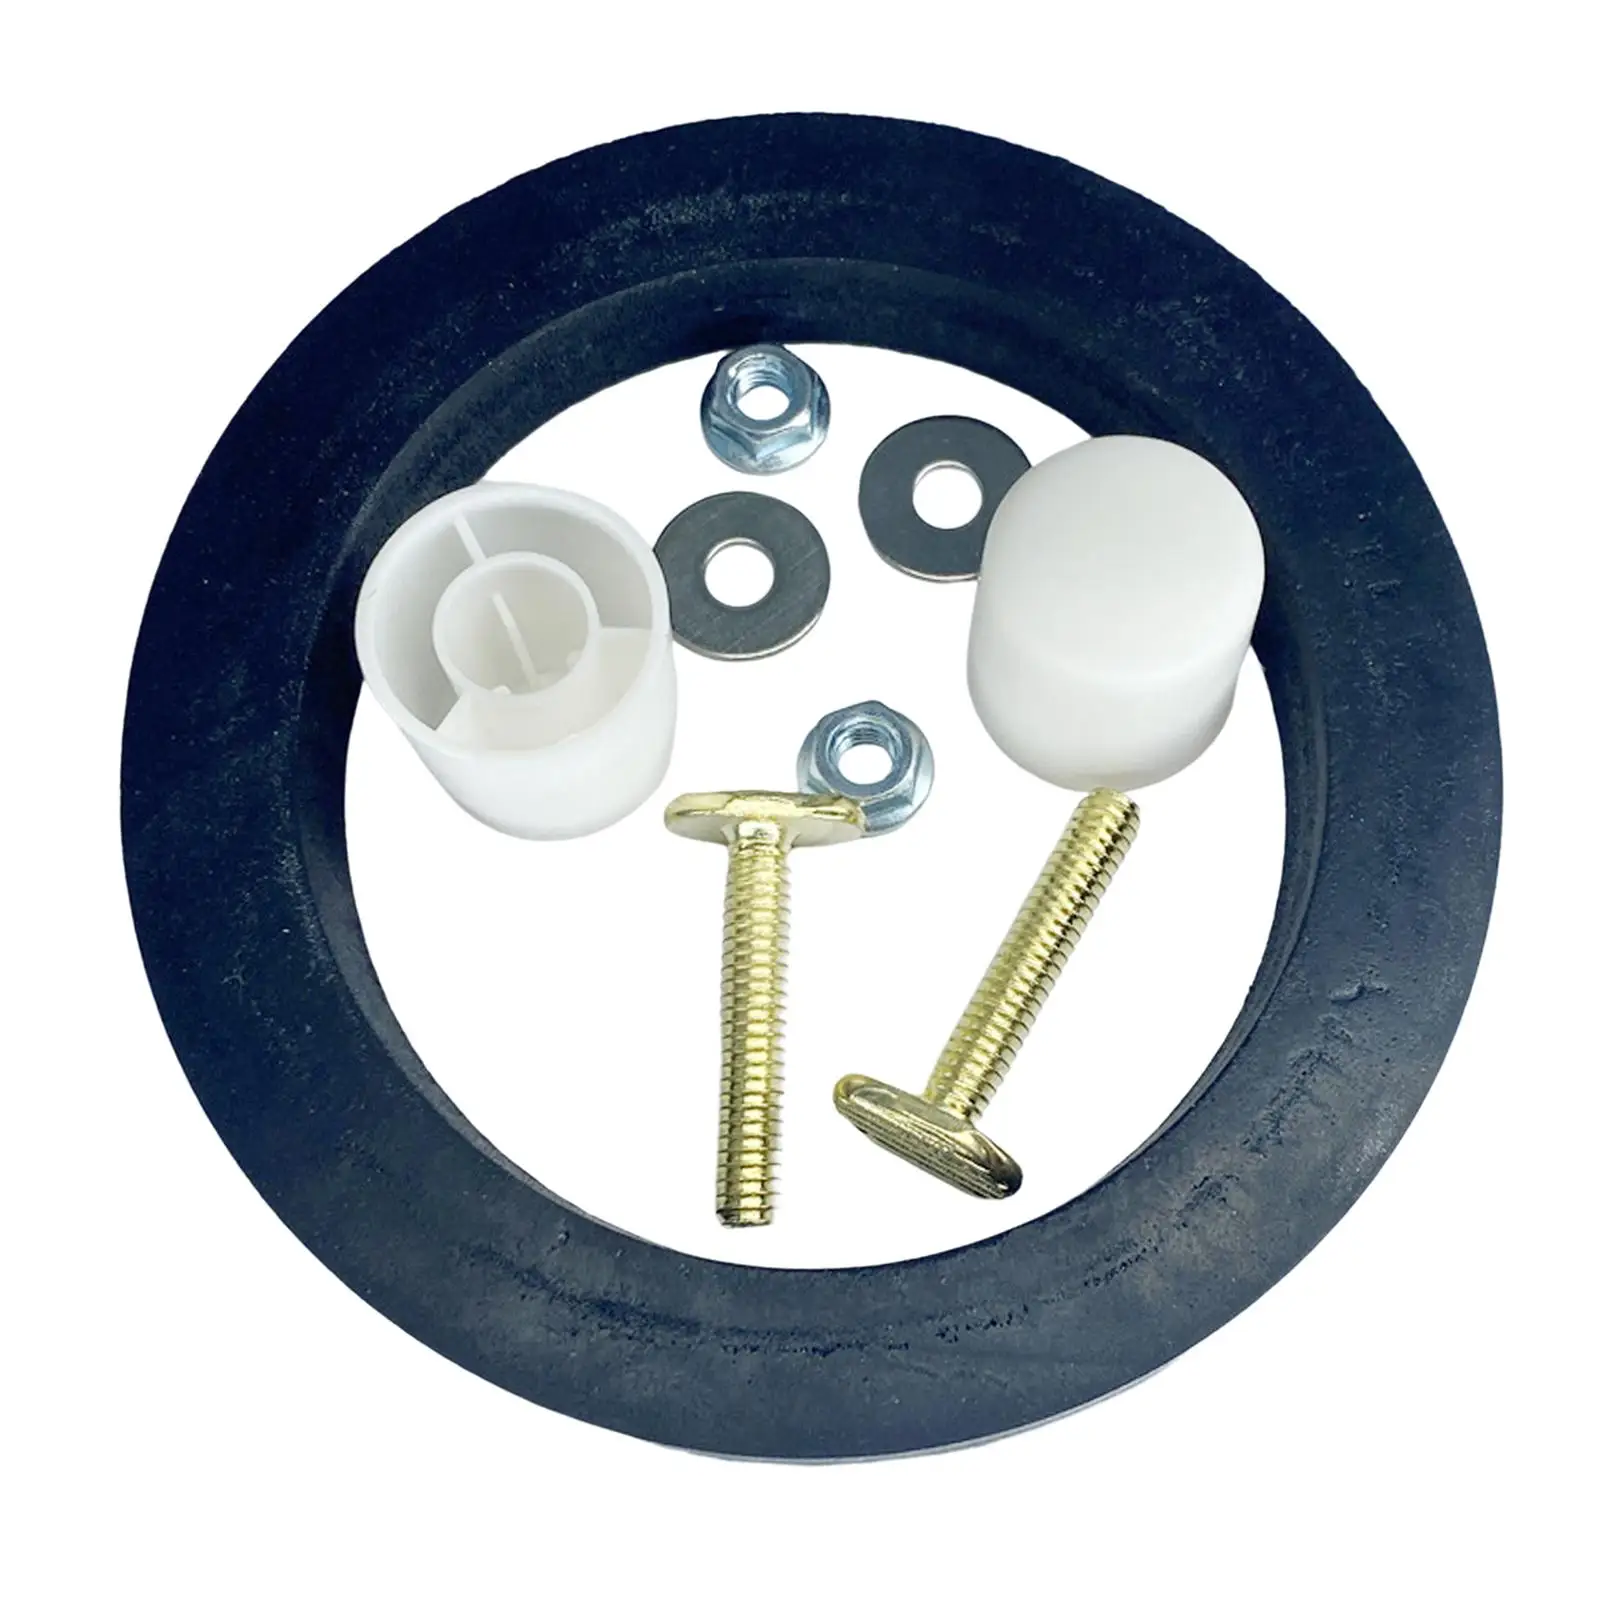 Seal Gasket of RV Toilet for Toilet Professional Accessories